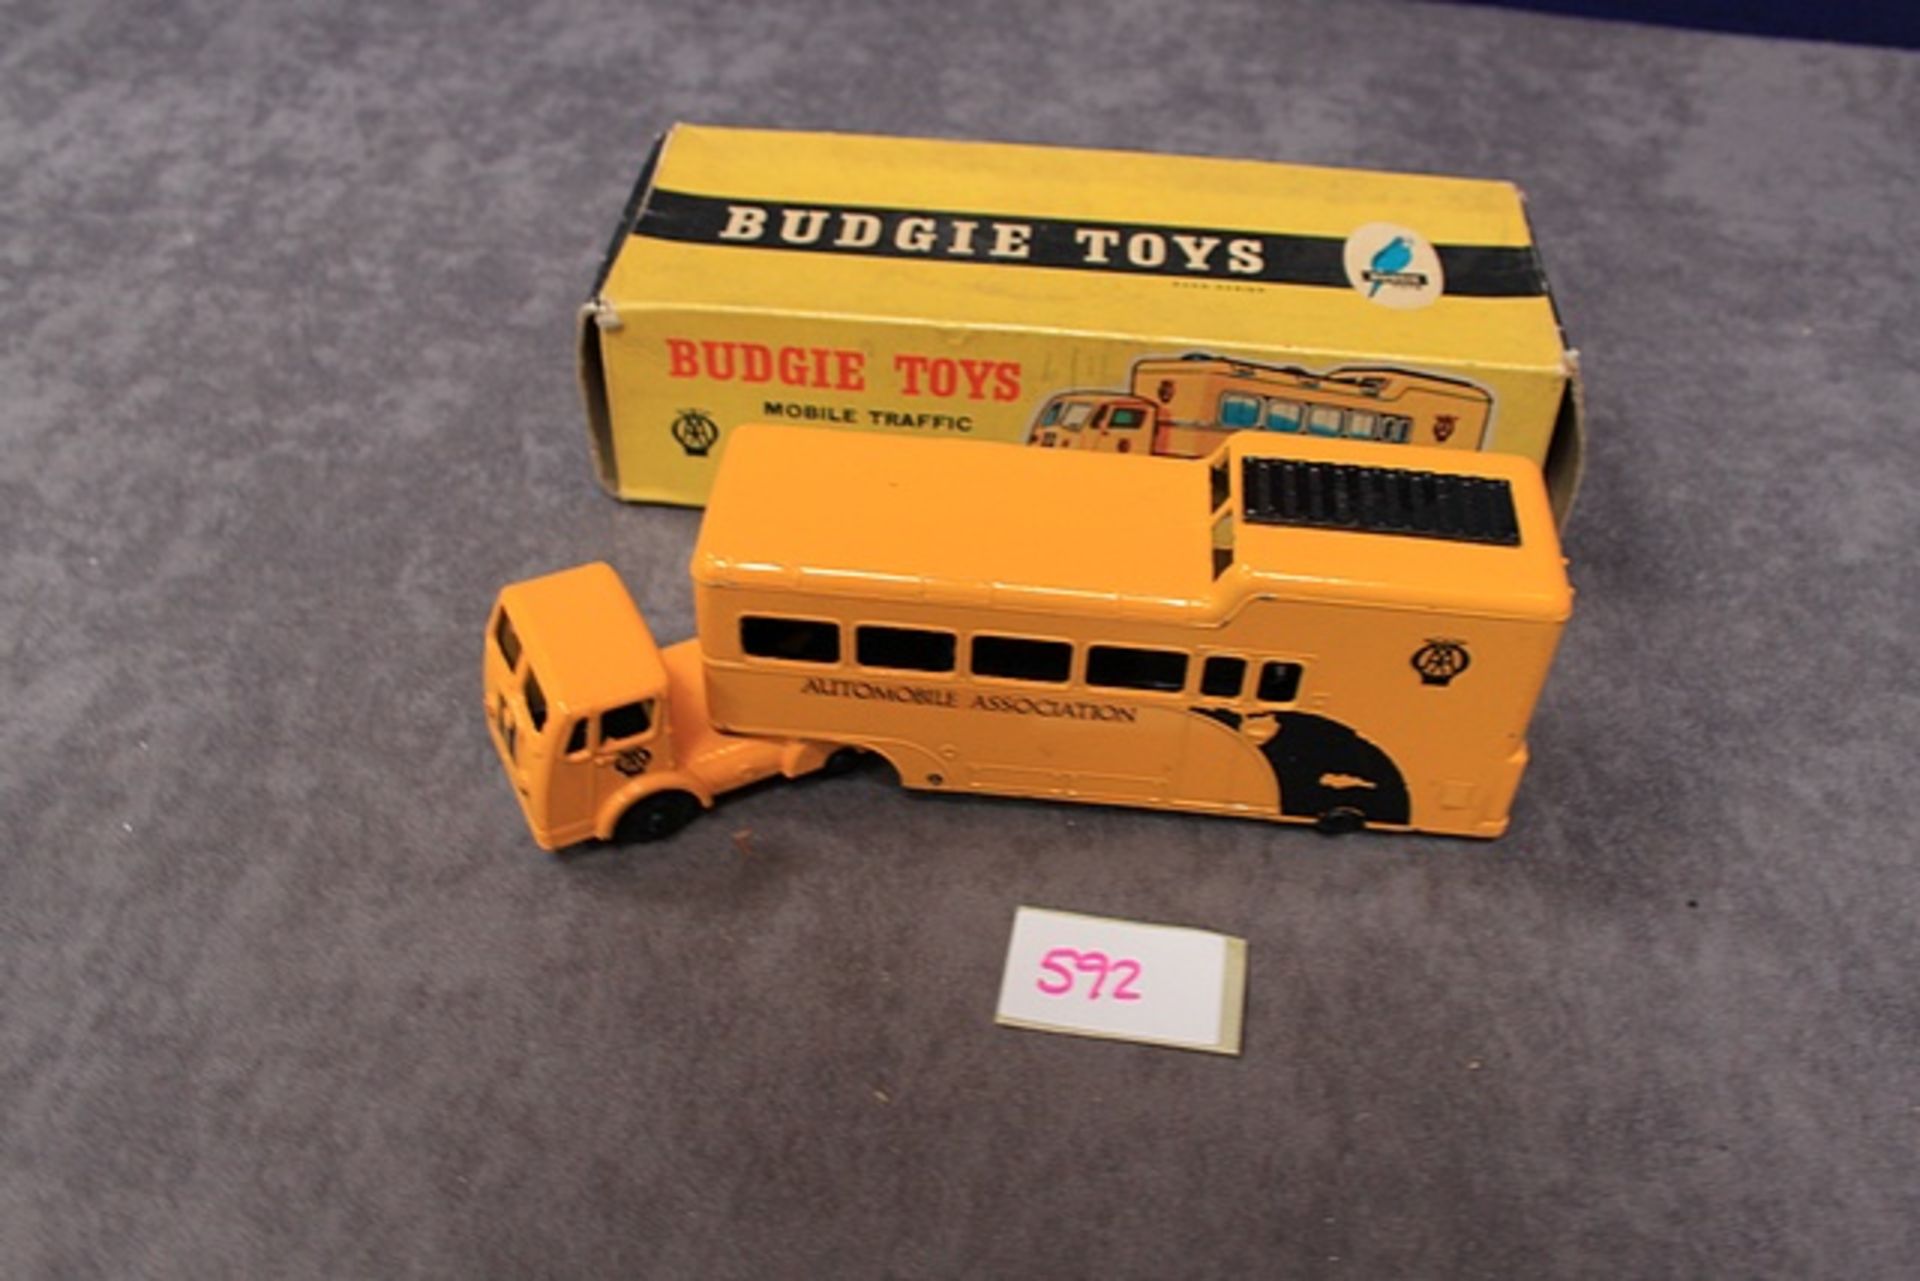 Budgie Diecast Aa Mobile Traffic Control Unit 'Jumbo' In Box - Image 2 of 2